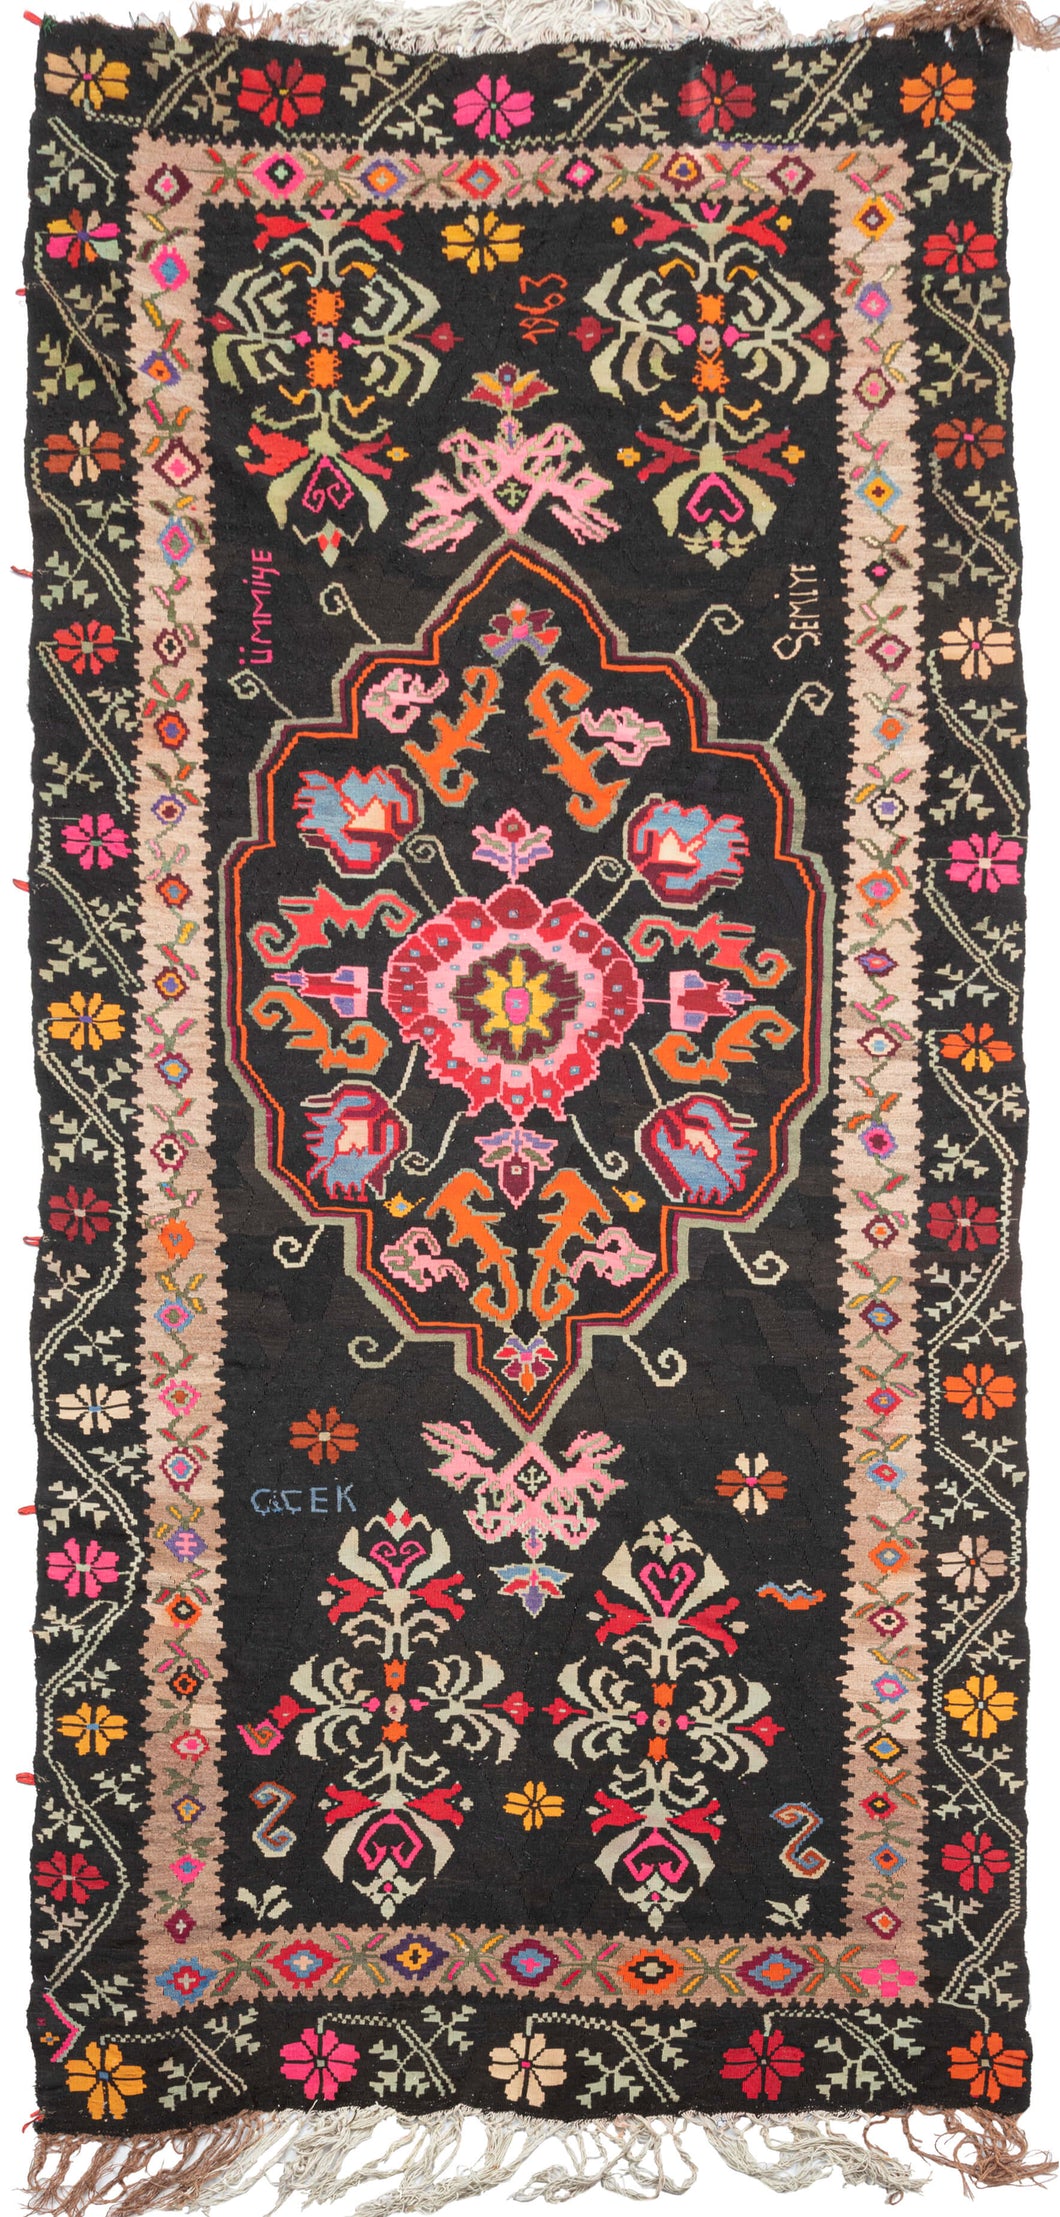 dated 1963 anatolian kelleghi kilim featuring energetic tones of hot pink, bright orange, purple, blue, yellow green, and red that really pop against the black ground. Of particular interest are the inclusions of the names 